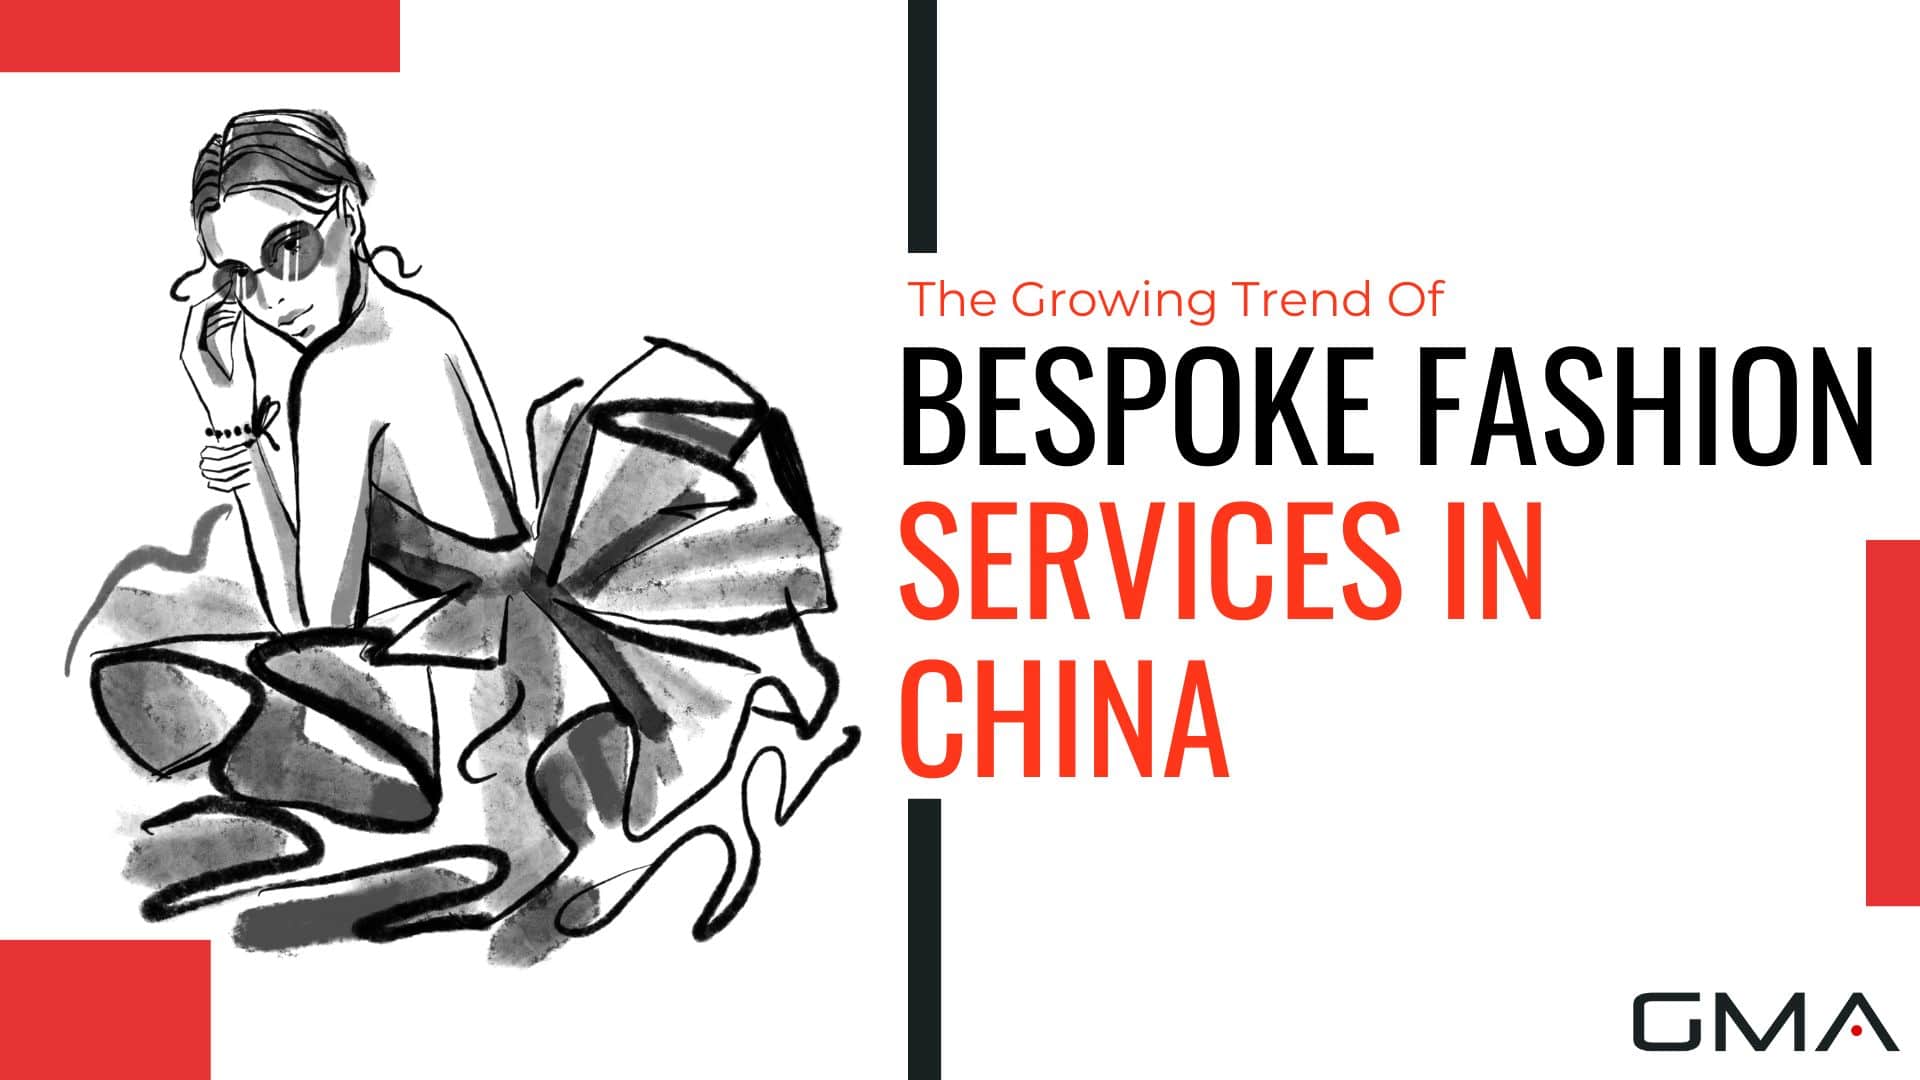 The Growing Trend Of Bespoke Fashion Services In China